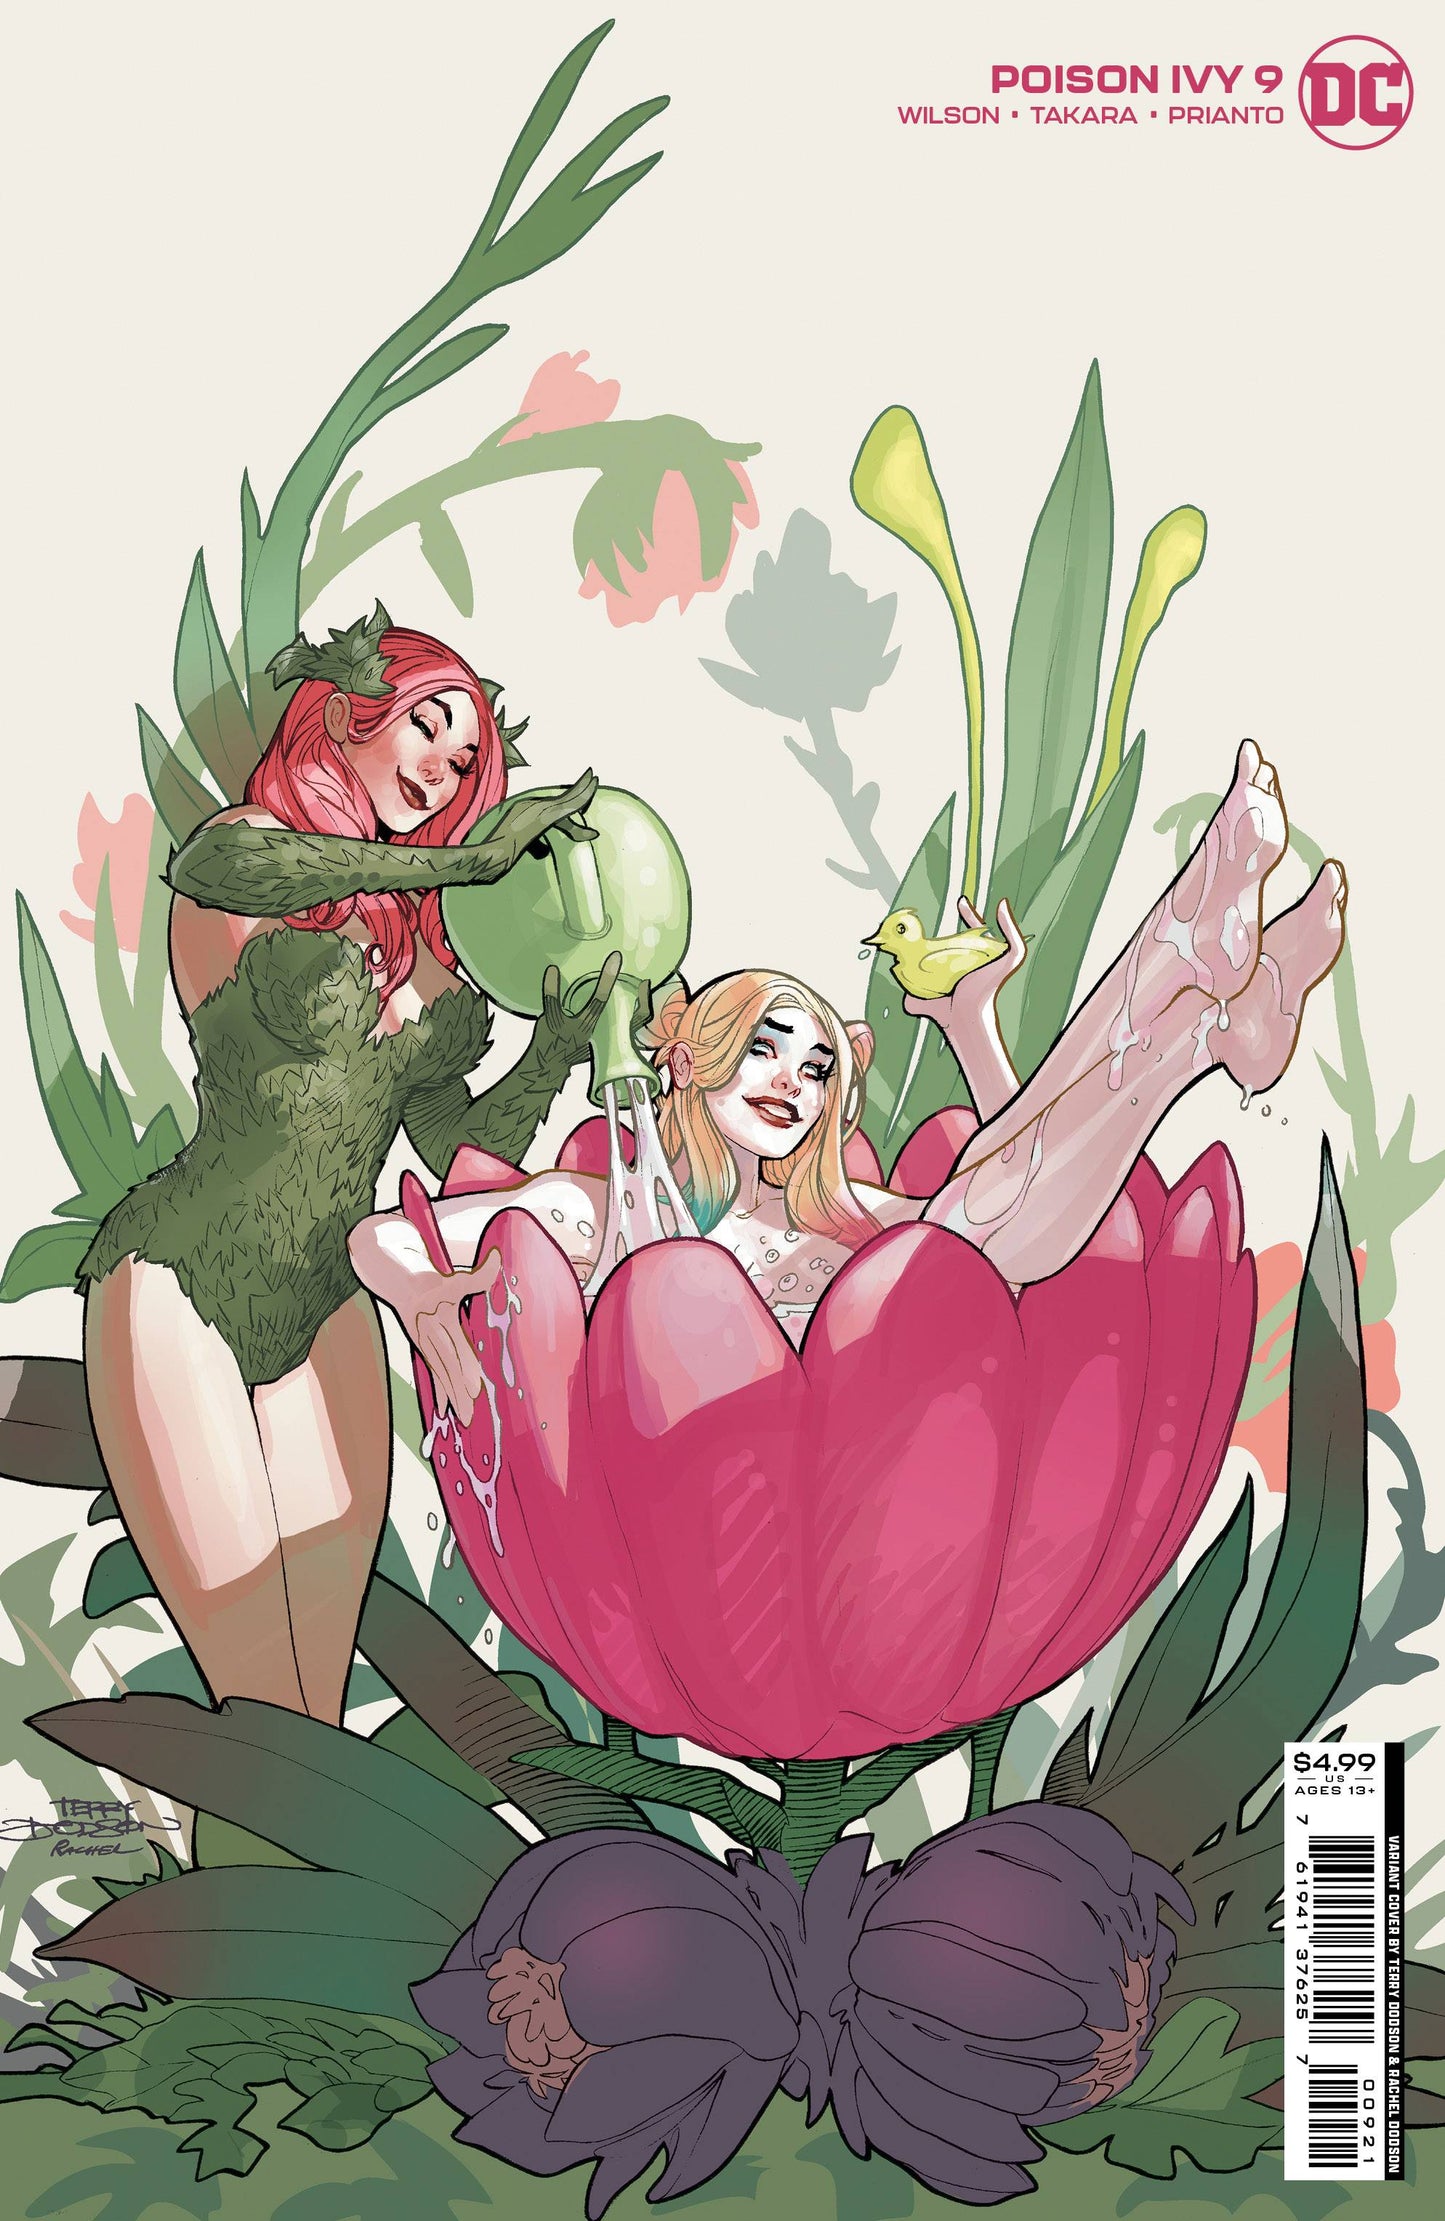 POISON IVY #9 | SELECT VARIANT COVERS |